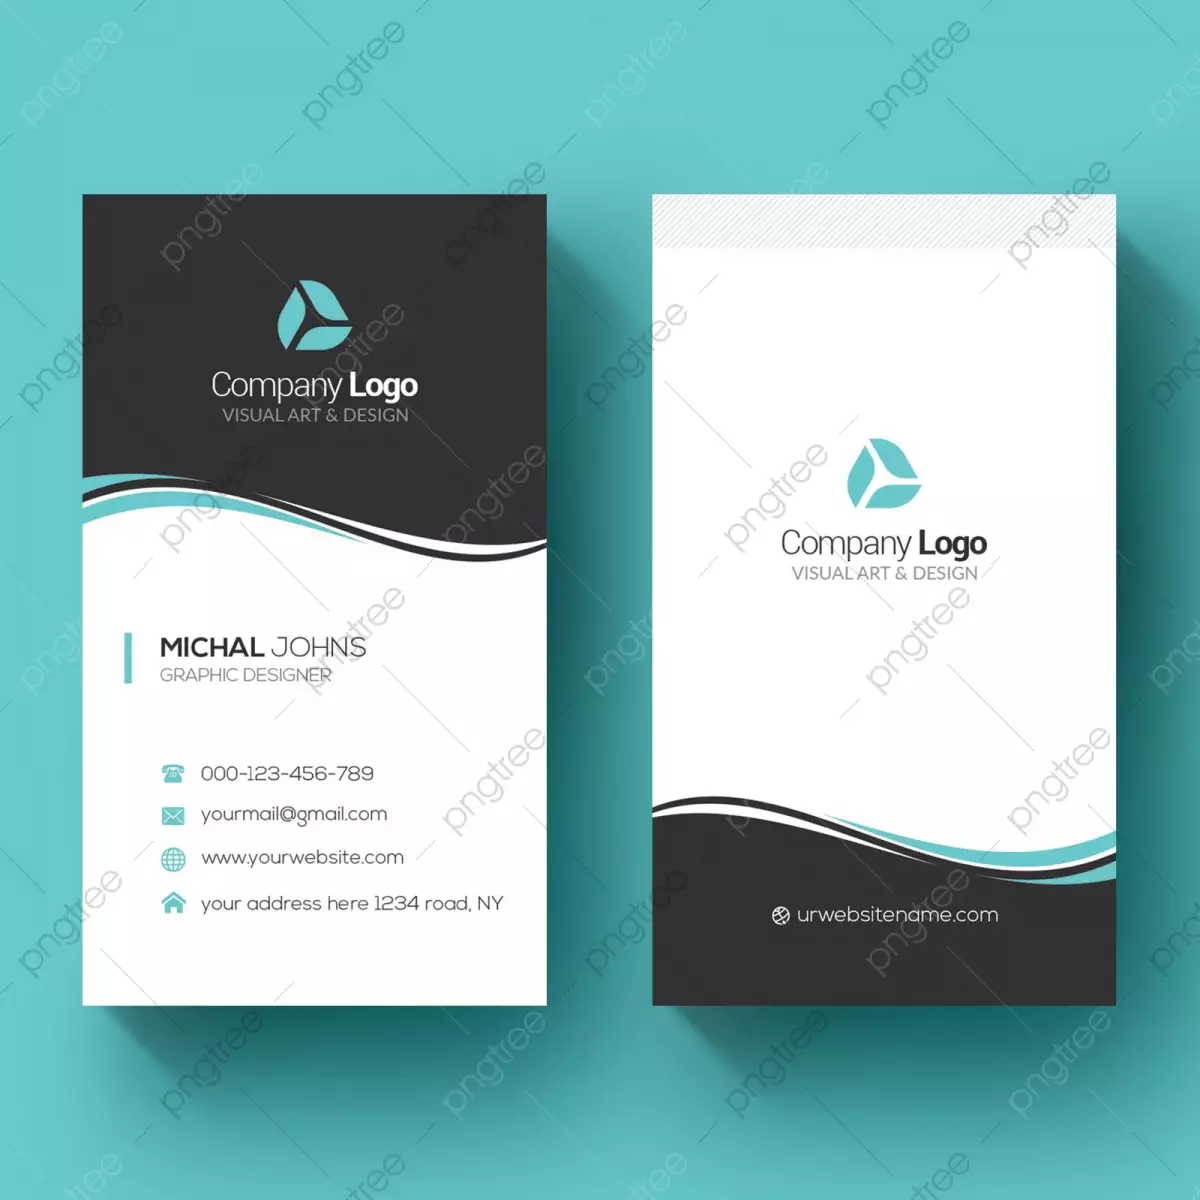 Vertical Business Card Template Download on Pngtree